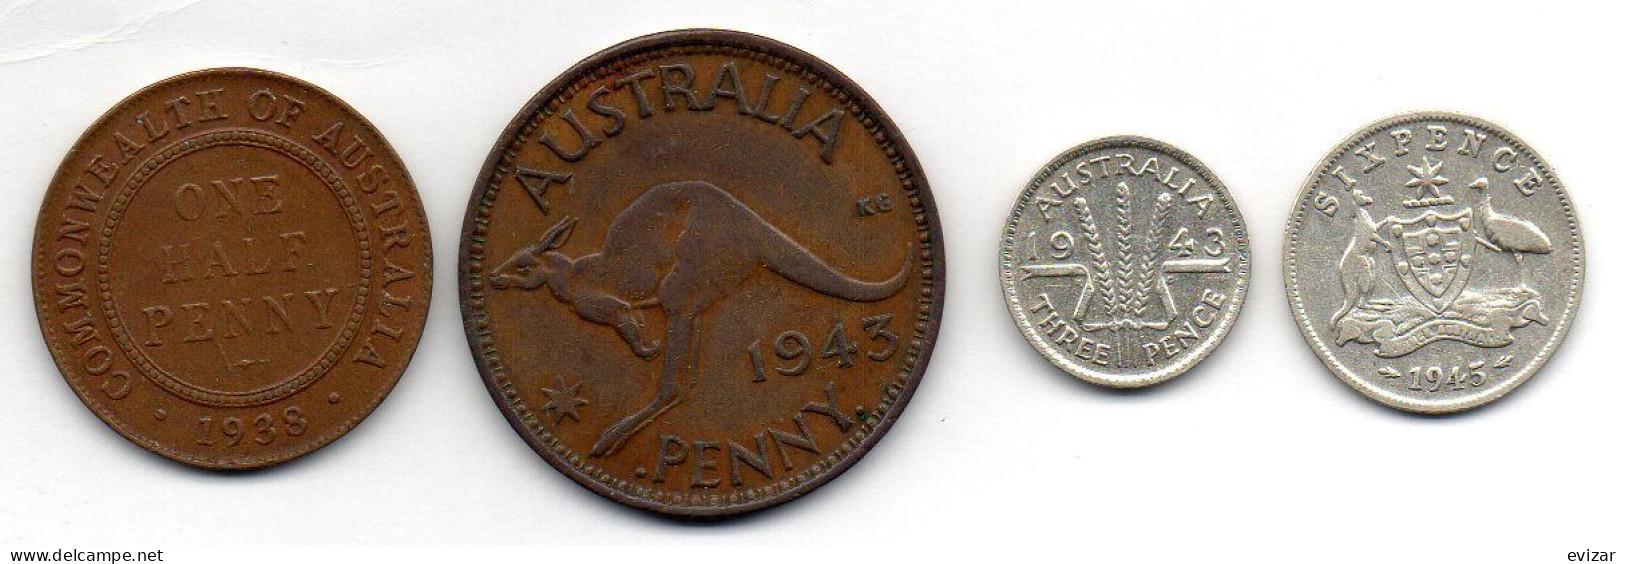 AUSTRALIA, Set Of Four Coins 1/2, 1, 3, 6 Pence, Bronze, Silver, Year 1938-45, KM # 35, 36, 37, 38 - Ohne Zuordnung